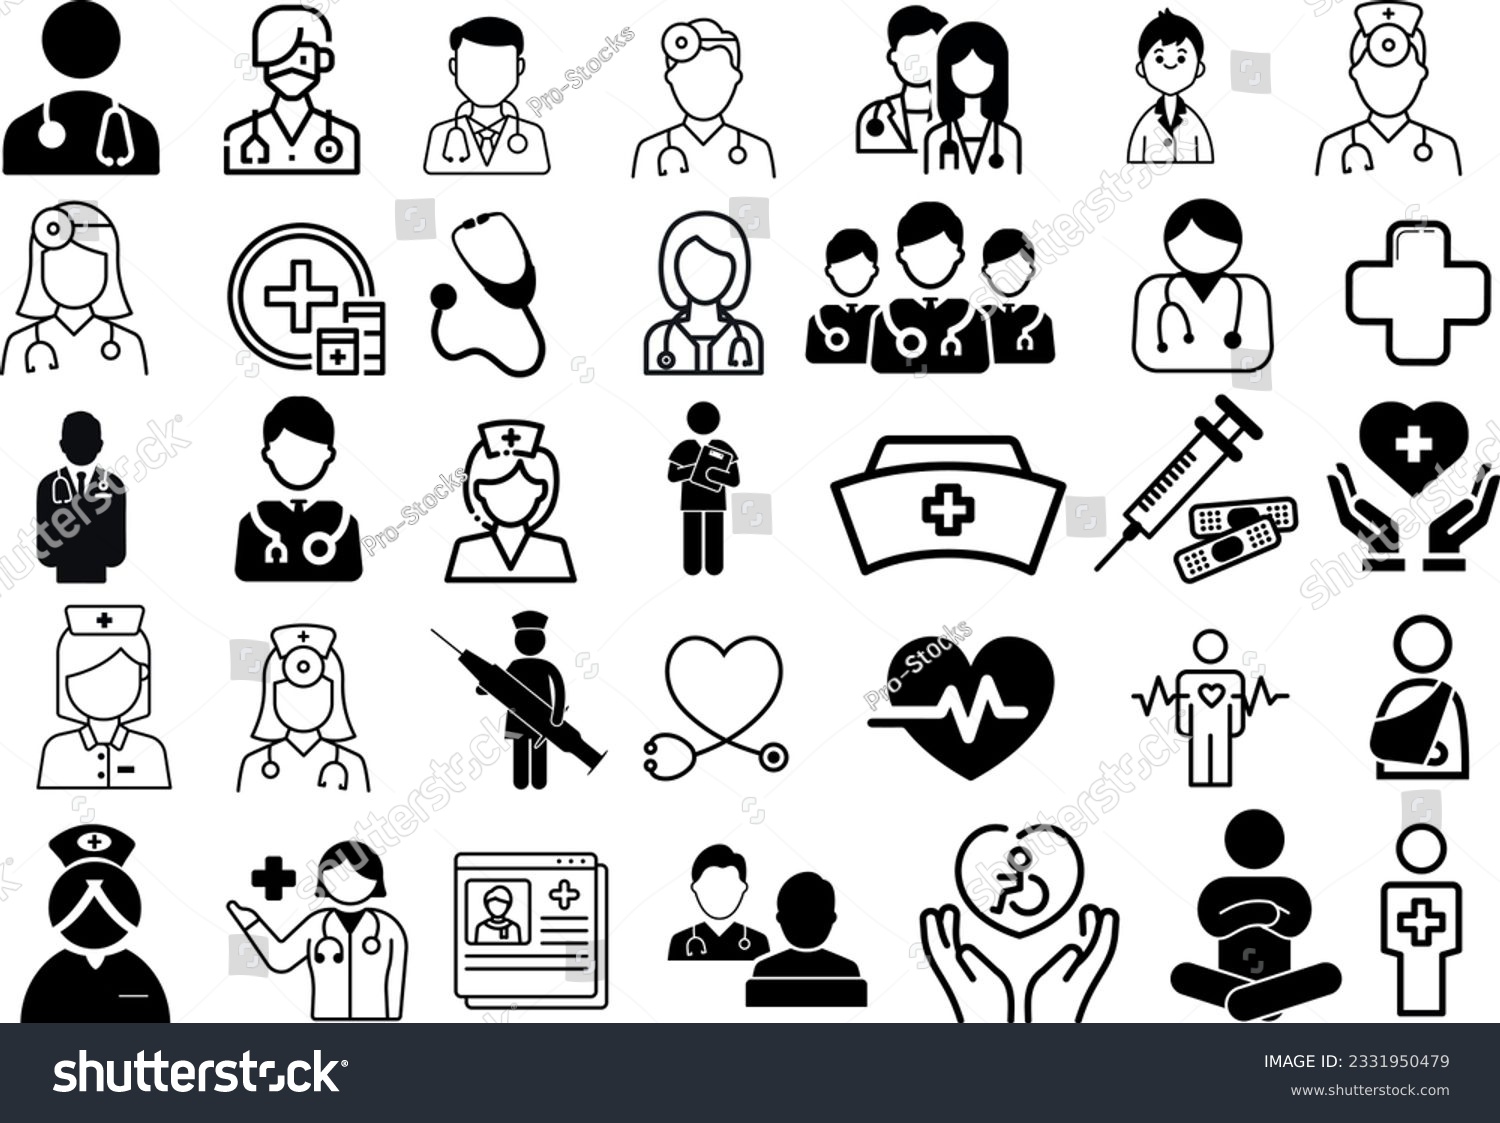 SVG of 35 Healthcare Icons Set Vector Illustration. This set of healthcare icons includes symbols for doctor,nurse, medical equipment, services, professions, and concepts. web design, mobile app,infographic svg